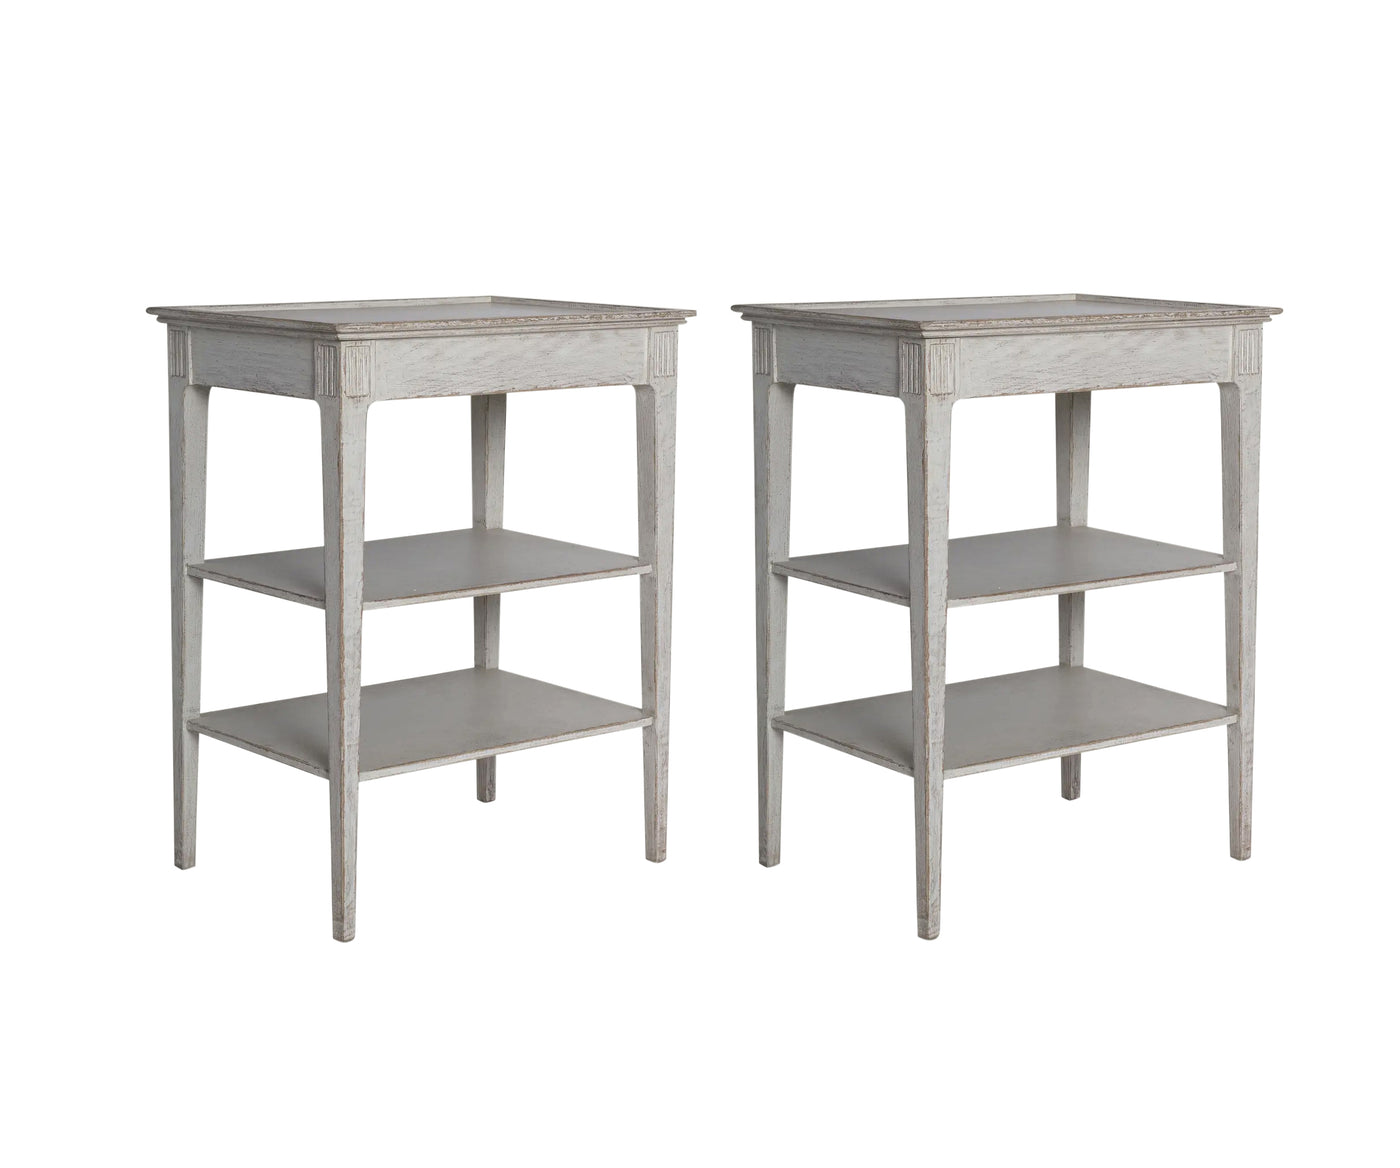 A Pair of Three Tier Side Tables in an Antique White Finish  | Newport Lamp And Shade | Located in Newport, RI